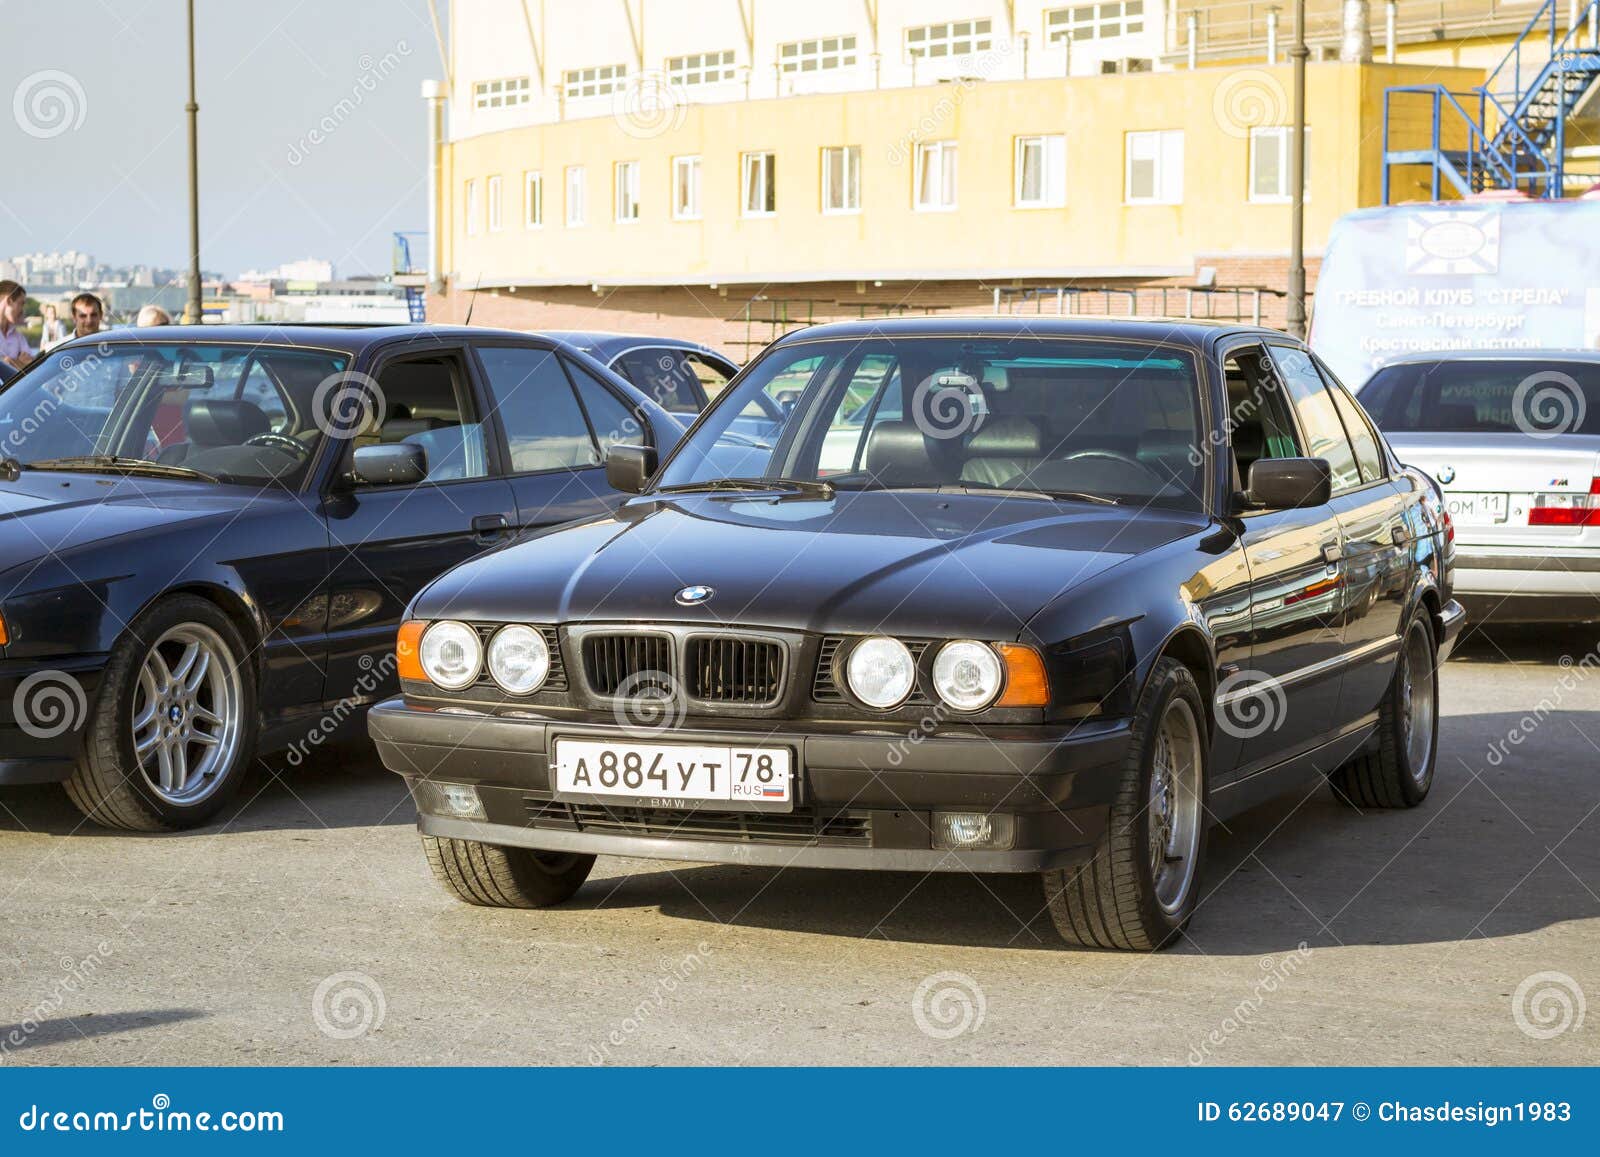 114 Bmw 5 Series E34 Royalty-Free Images, Stock Photos & Pictures